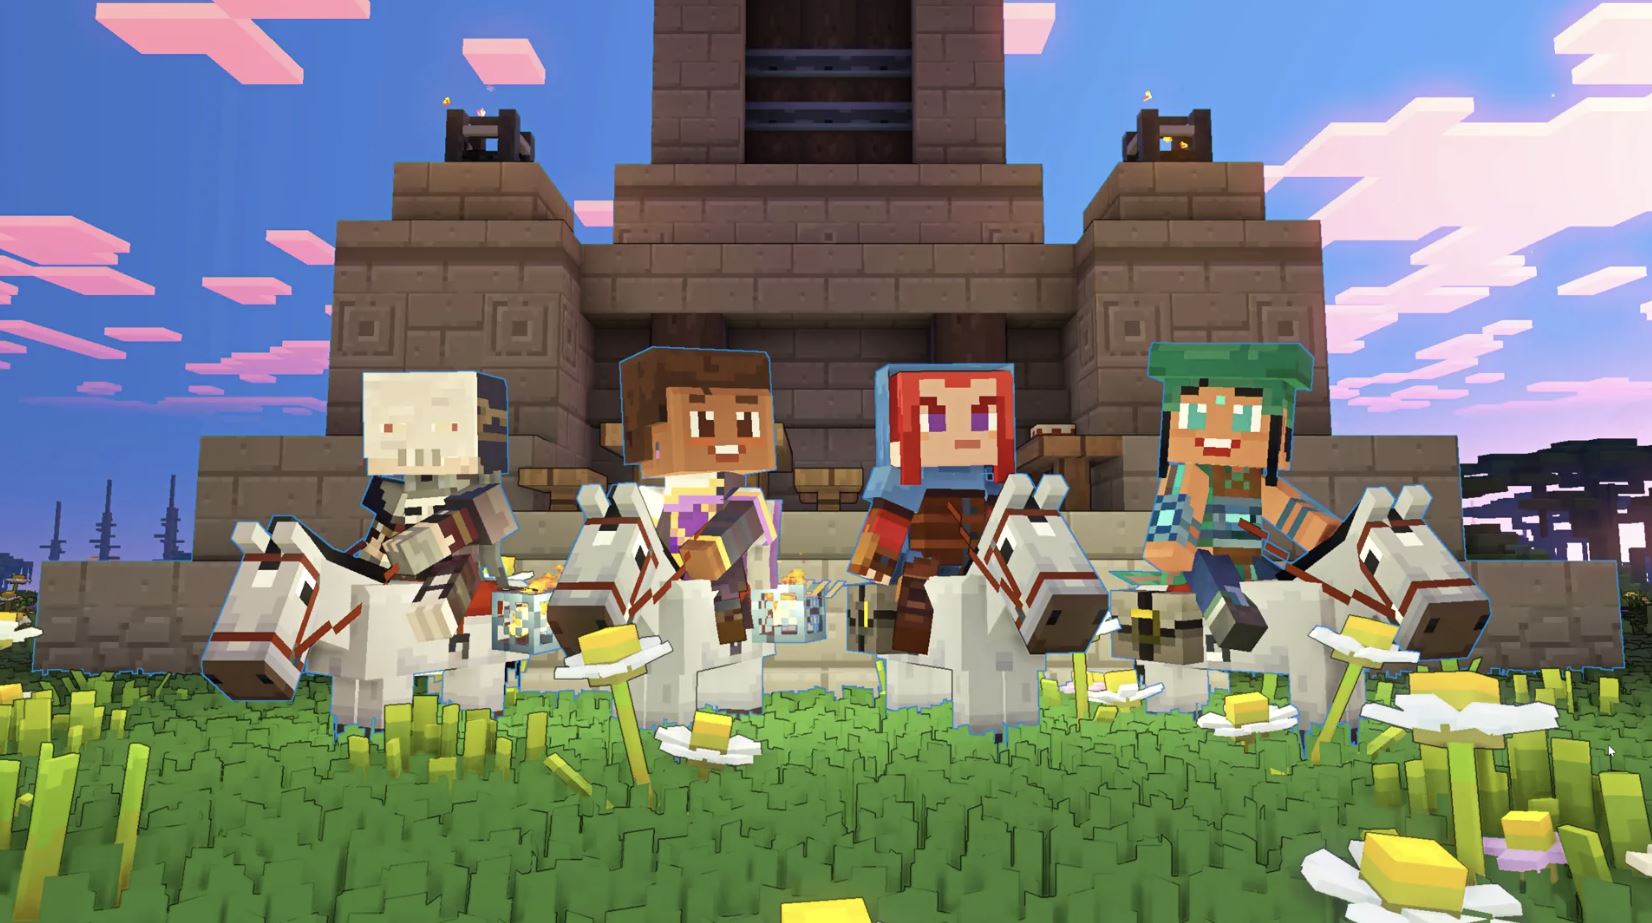 How to Play Minecraft with Friends, Multiplayer & Online